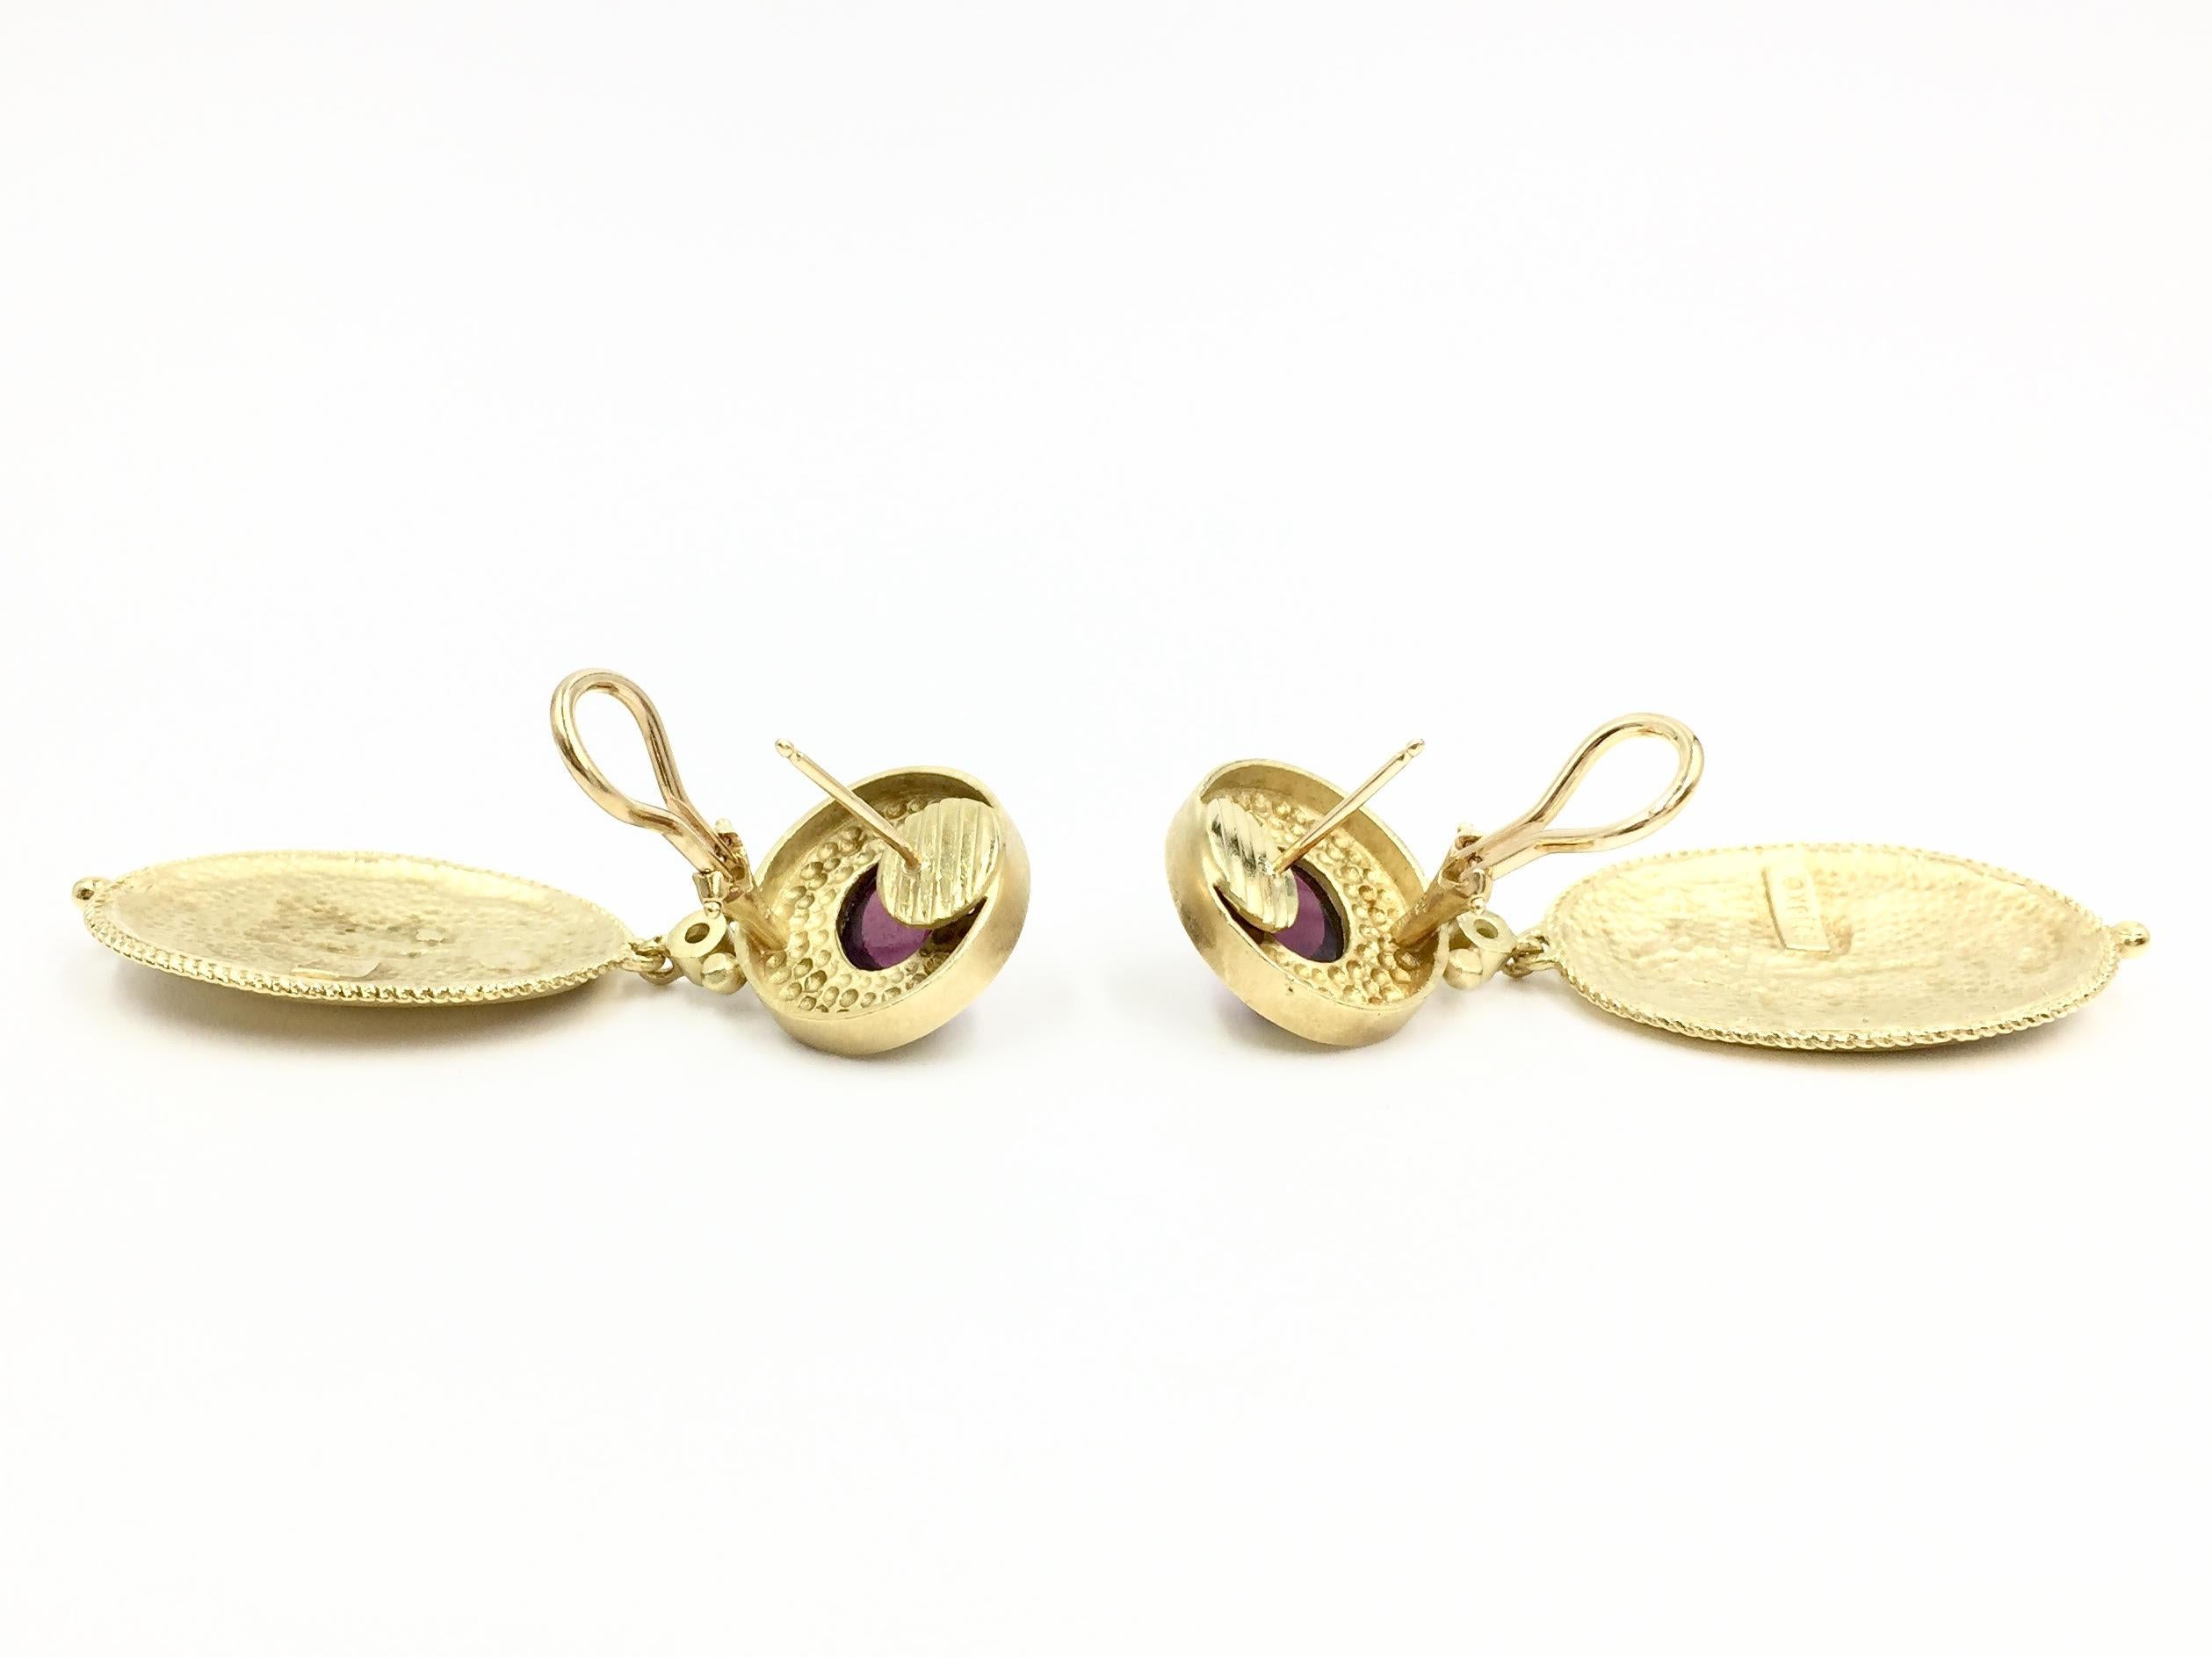 Solid and substantial 18 karat yellow gold Greek Revival drop earrings made with superior craftsmanship by Seidengang. These gorgeous earrings have an exquisite finish, hand carved Greek goddess and feature a smooth cabochon pinkish-red rubelite and